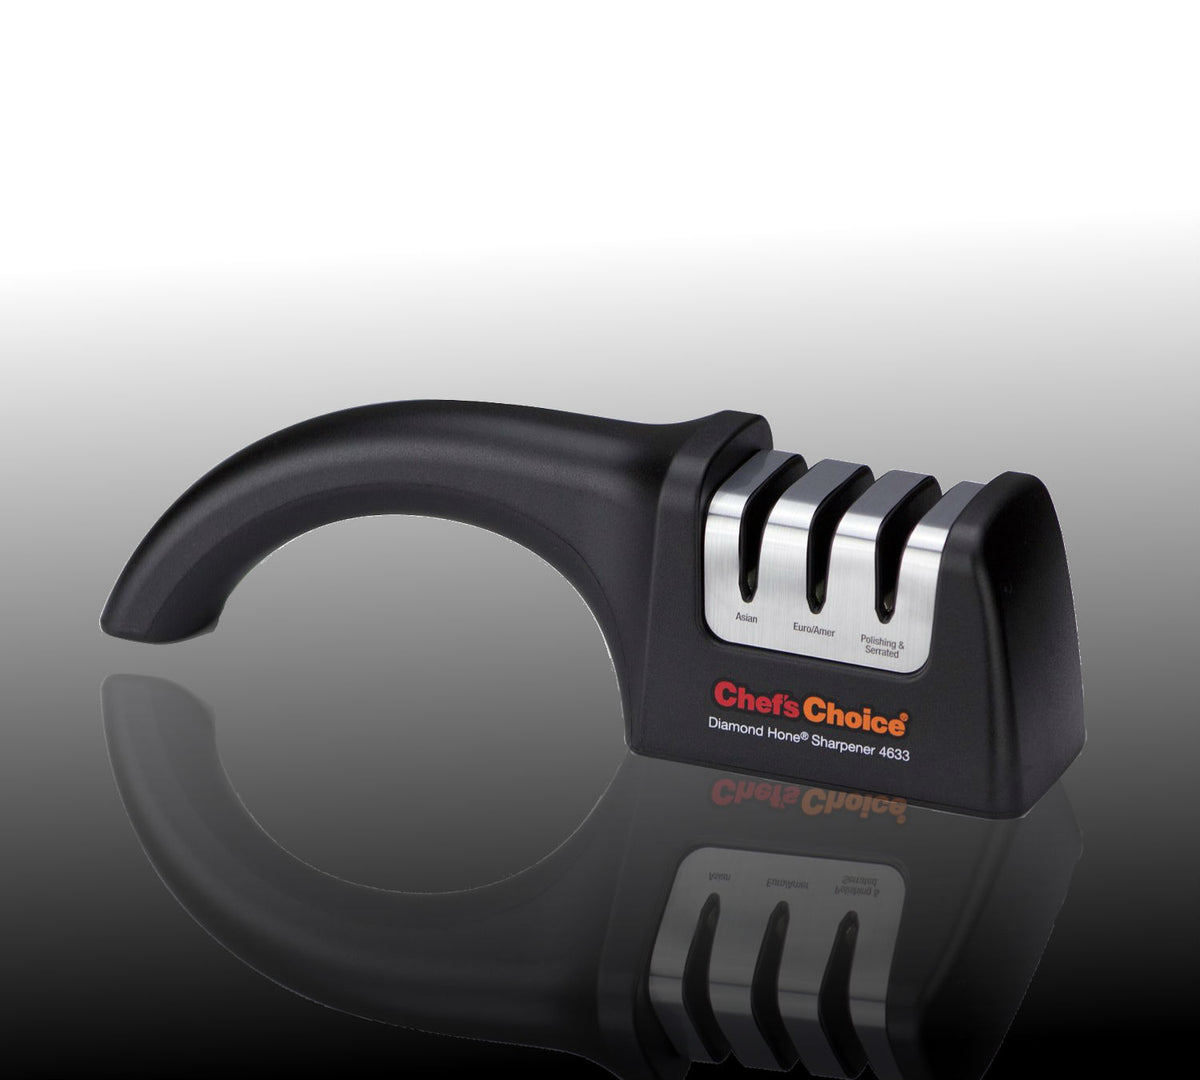 buy knife sharpeners & cutlery at cheap rate in bulk. wholesale & retail kitchen gadgets & accessories store.